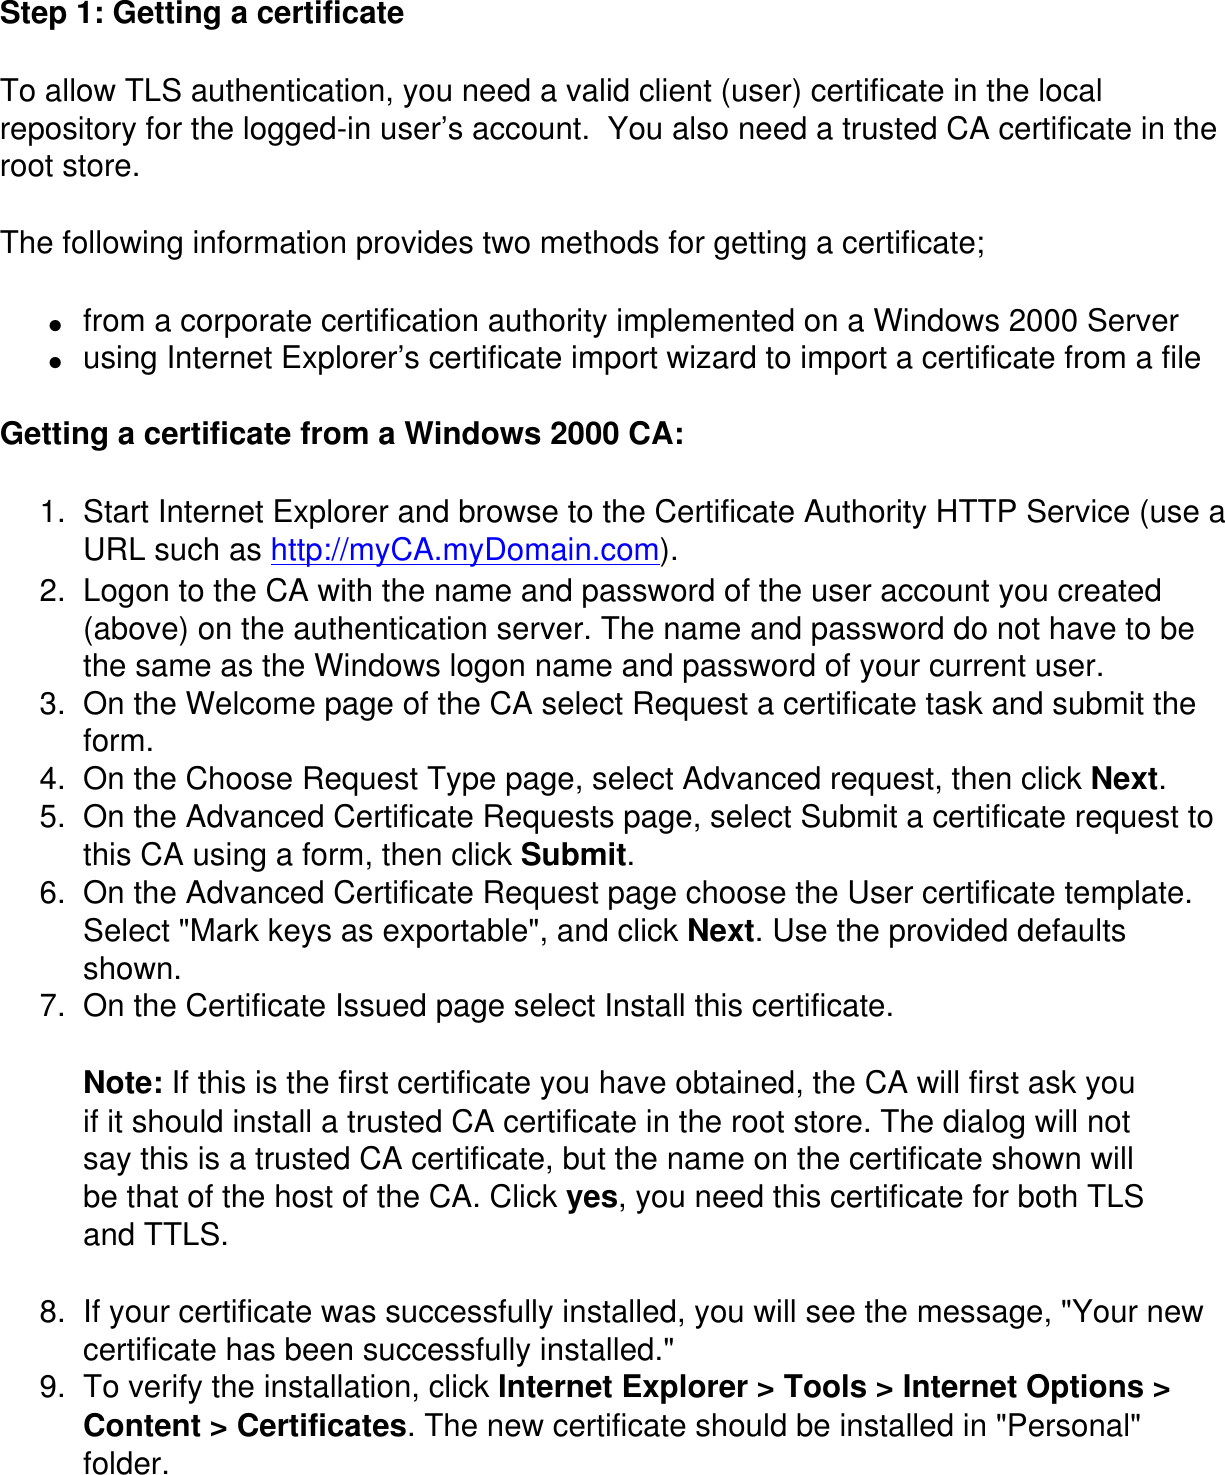 Step 1: Getting a certificate To allow TLS authentication, you need a valid client (user) certificate in the local repository for the logged-in user’s account.  You also need a trusted CA certificate in the root store.The following information provides two methods for getting a certificate;●     from a corporate certification authority implemented on a Windows 2000 Server ●     using Internet Explorer’s certificate import wizard to import a certificate from a file Getting a certificate from a Windows 2000 CA: 1.  Start Internet Explorer and browse to the Certificate Authority HTTP Service (use a URL such as http://myCA.myDomain.com). 2.  Logon to the CA with the name and password of the user account you created (above) on the authentication server. The name and password do not have to be the same as the Windows logon name and password of your current user. 3.  On the Welcome page of the CA select Request a certificate task and submit the form. 4.  On the Choose Request Type page, select Advanced request, then click Next. 5.  On the Advanced Certificate Requests page, select Submit a certificate request to this CA using a form, then click Submit. 6.  On the Advanced Certificate Request page choose the User certificate template. Select &quot;Mark keys as exportable&quot;, and click Next. Use the provided defaults shown. 7.  On the Certificate Issued page select Install this certificate.Note: If this is the first certificate you have obtained, the CA will first ask you if it should install a trusted CA certificate in the root store. The dialog will not say this is a trusted CA certificate, but the name on the certificate shown will be that of the host of the CA. Click yes, you need this certificate for both TLS and TTLS.8.  If your certificate was successfully installed, you will see the message, &quot;Your new certificate has been successfully installed.&quot;9.  To verify the installation, click Internet Explorer &gt; Tools &gt; Internet Options &gt; Content &gt; Certificates. The new certificate should be installed in &quot;Personal&quot; folder.